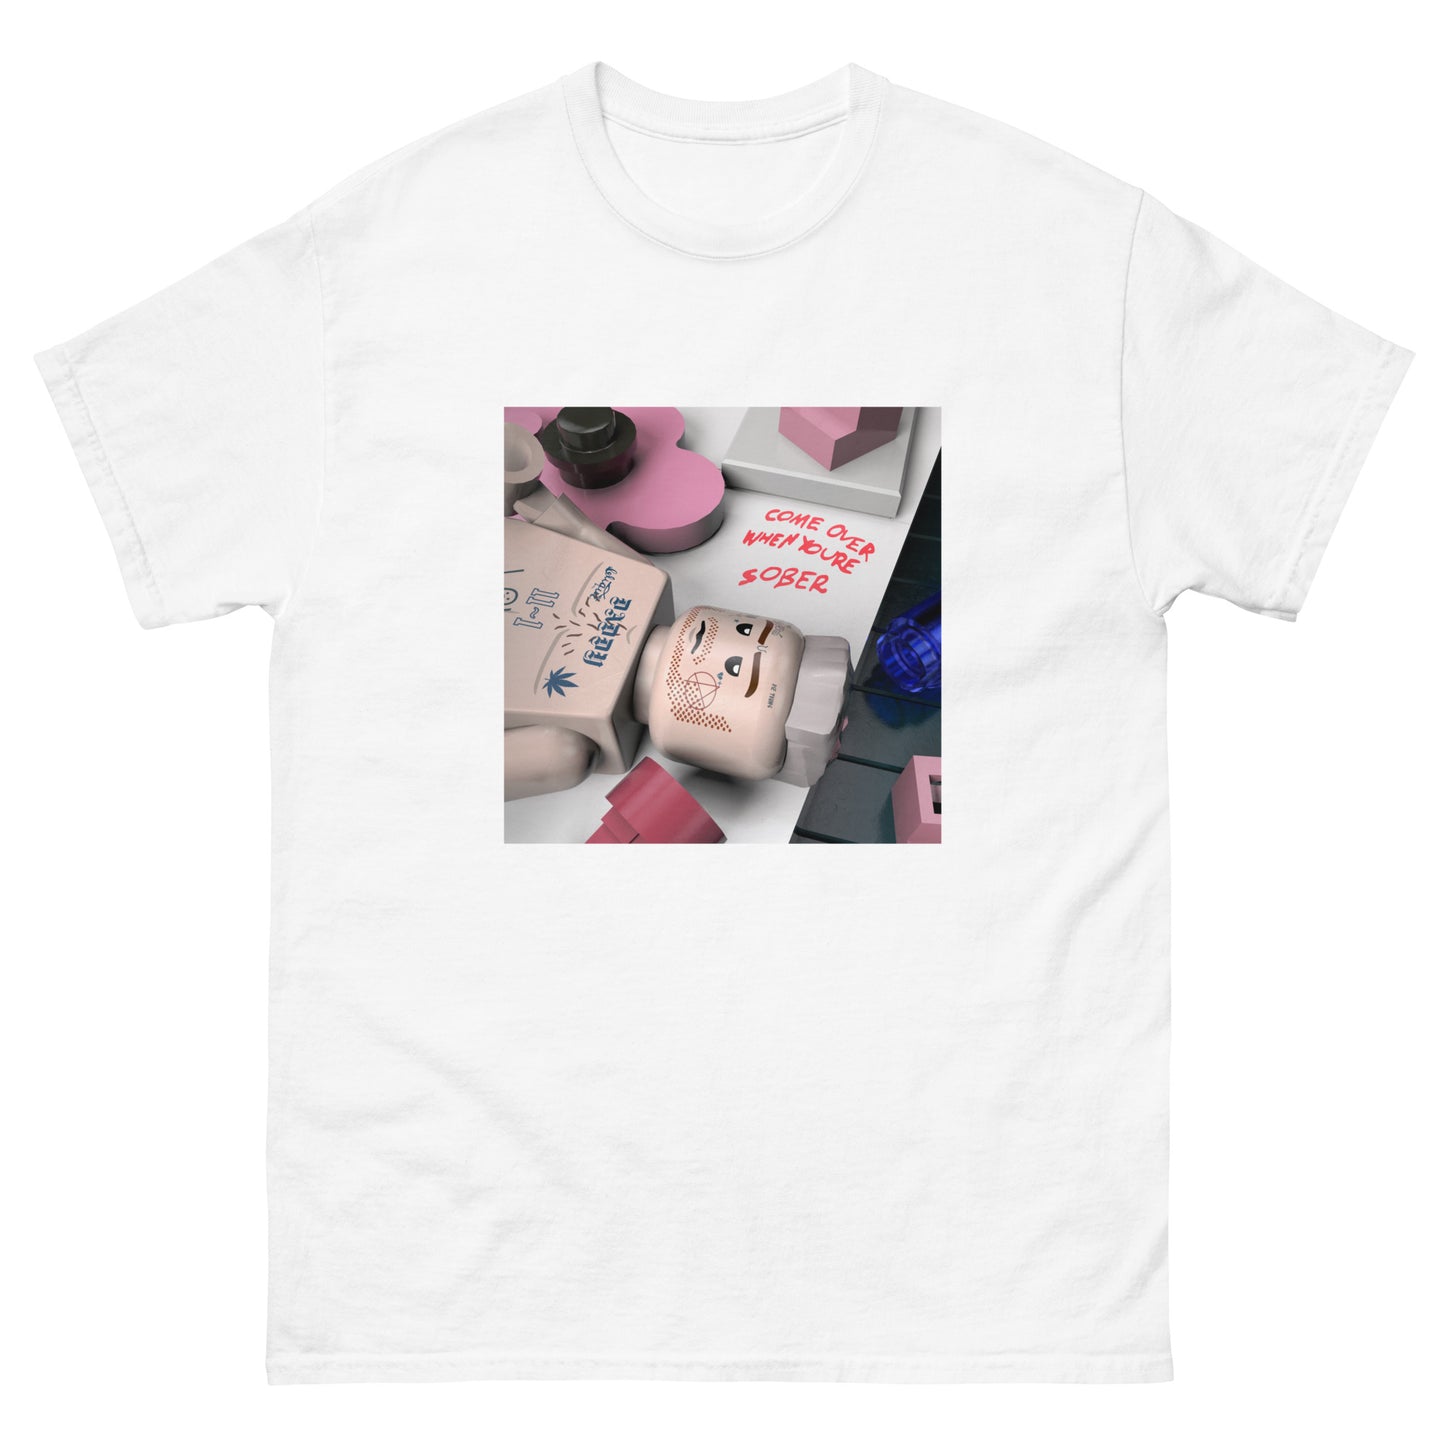 "Lil Peep - Come Over When You're Sober, Pt. 1" Lego Parody Tshirt